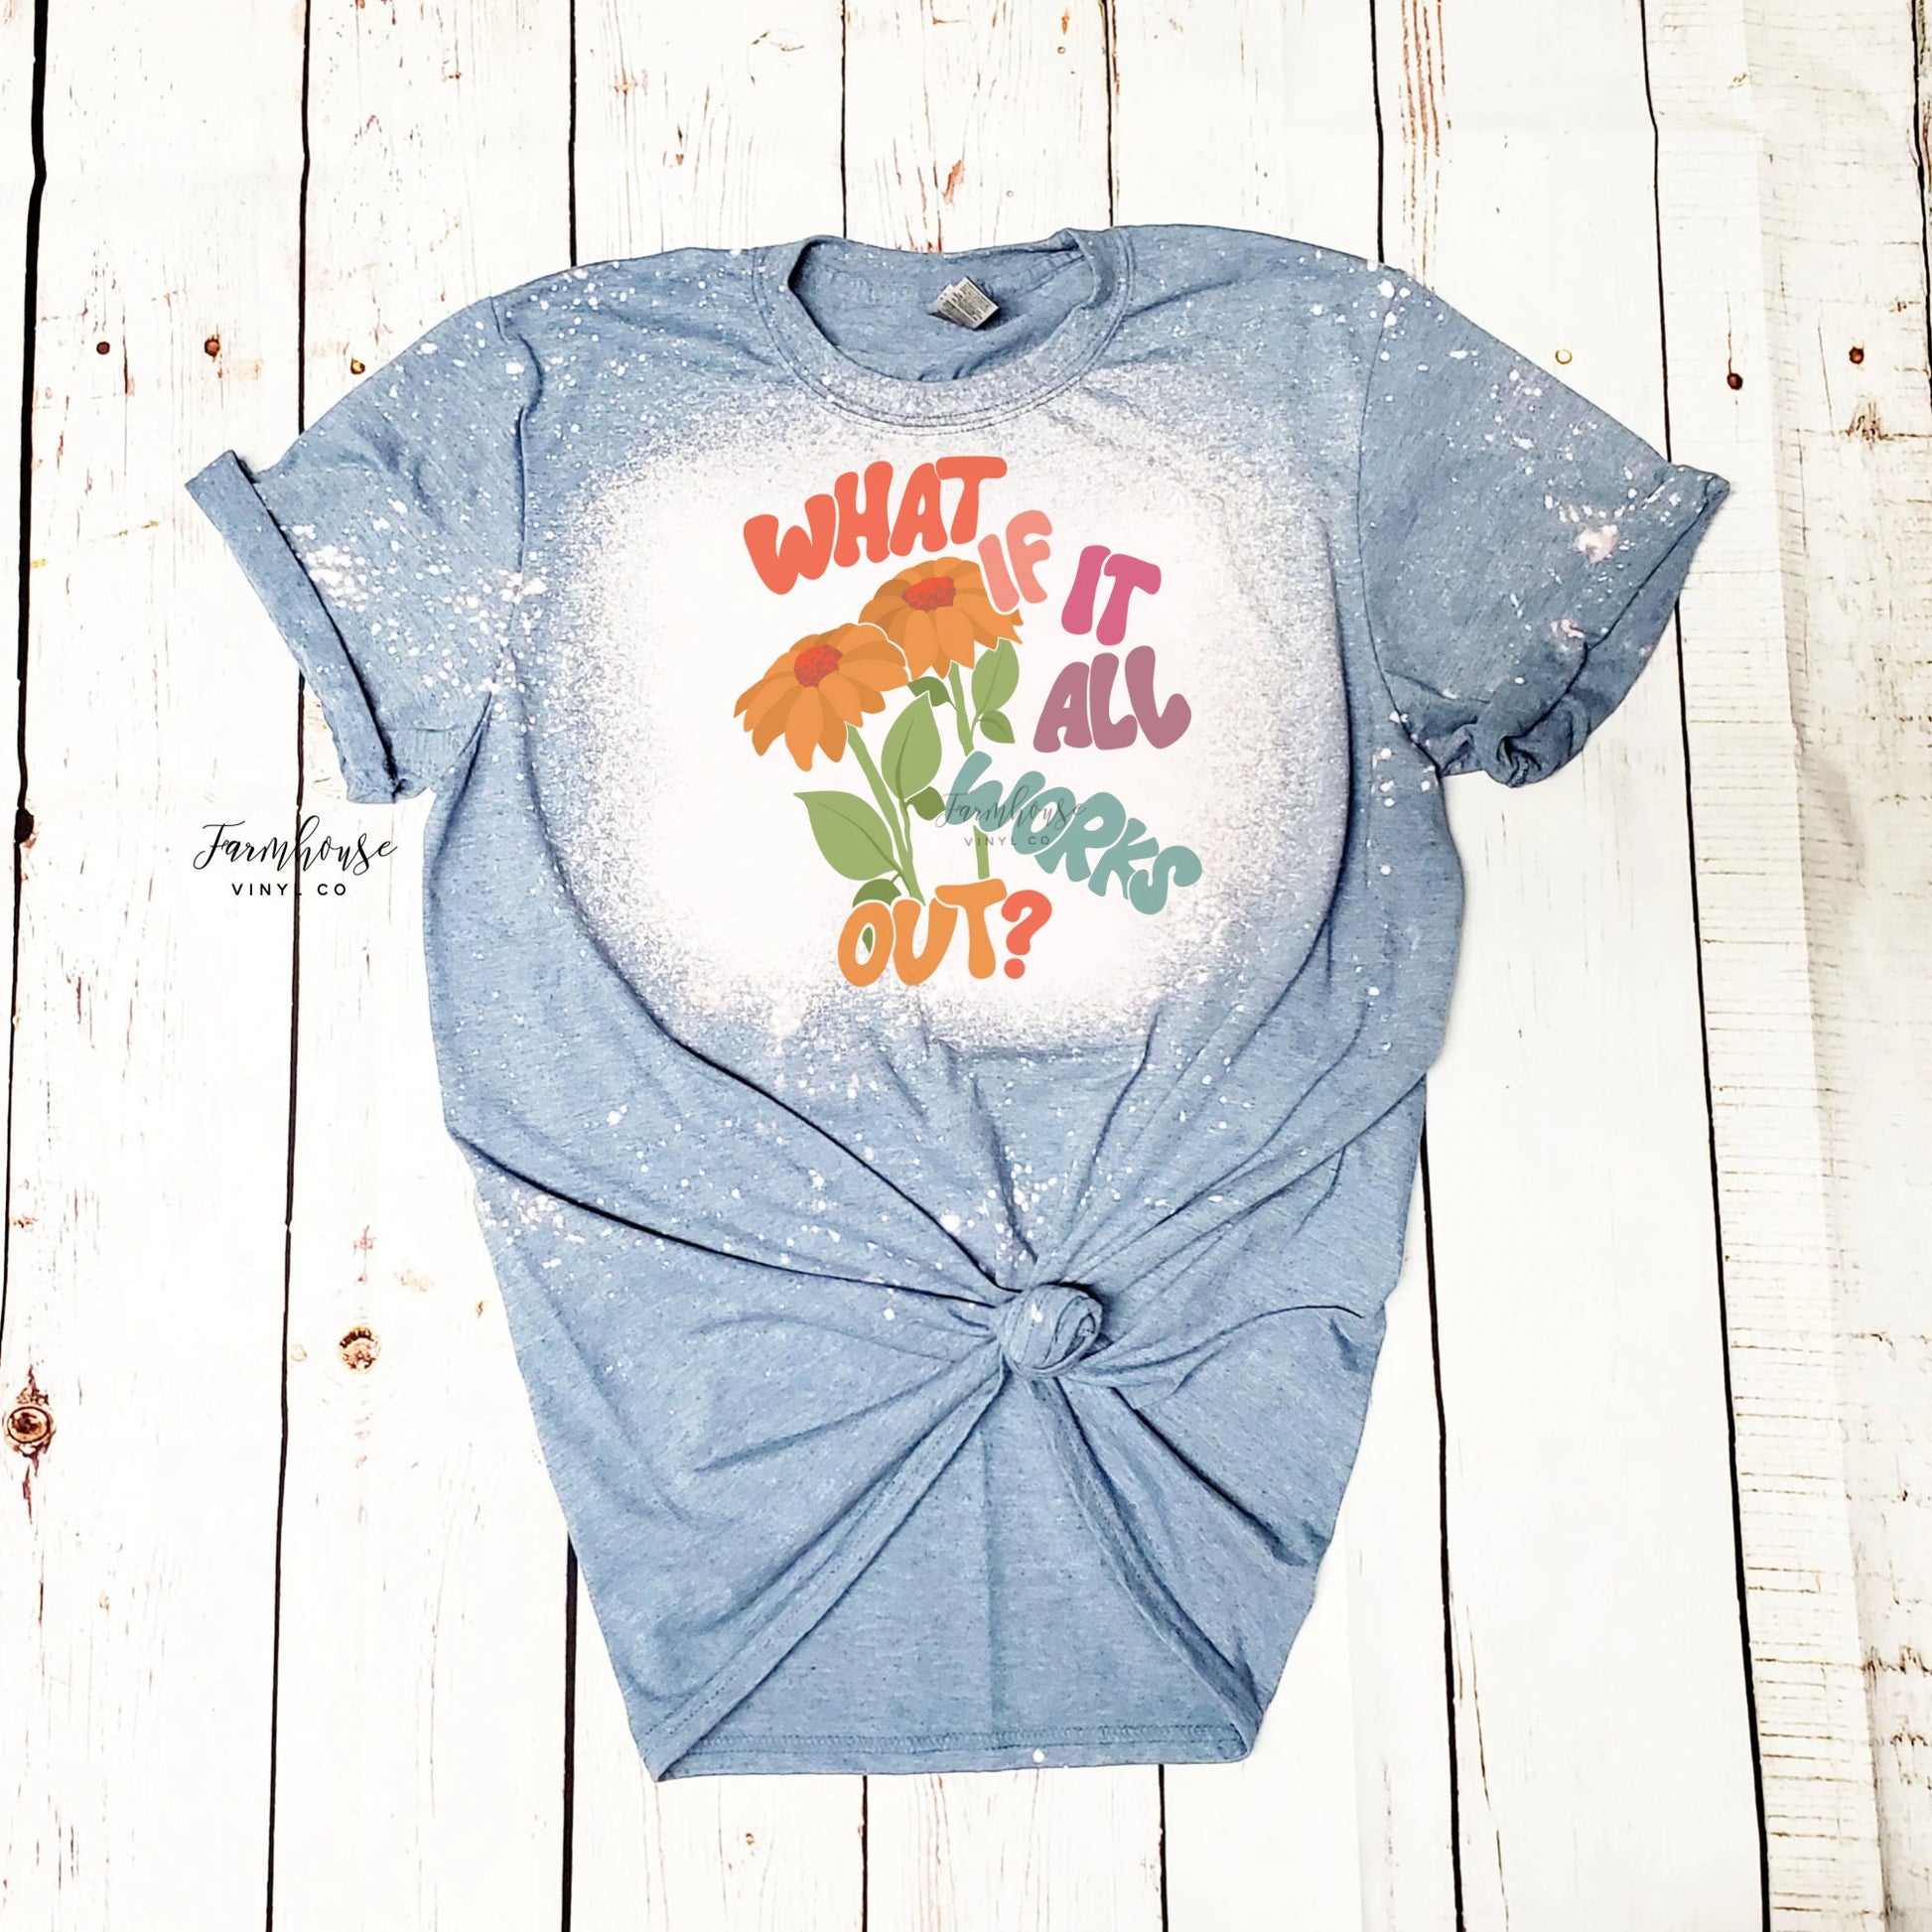 What if it All Works Out Retro Font Tee Shirt / Positive Quote Sweatshirt Tee / Retro Smiley Face / Hippie Tie Dye / Trendy Retro T Shirt - Farmhouse Vinyl Co